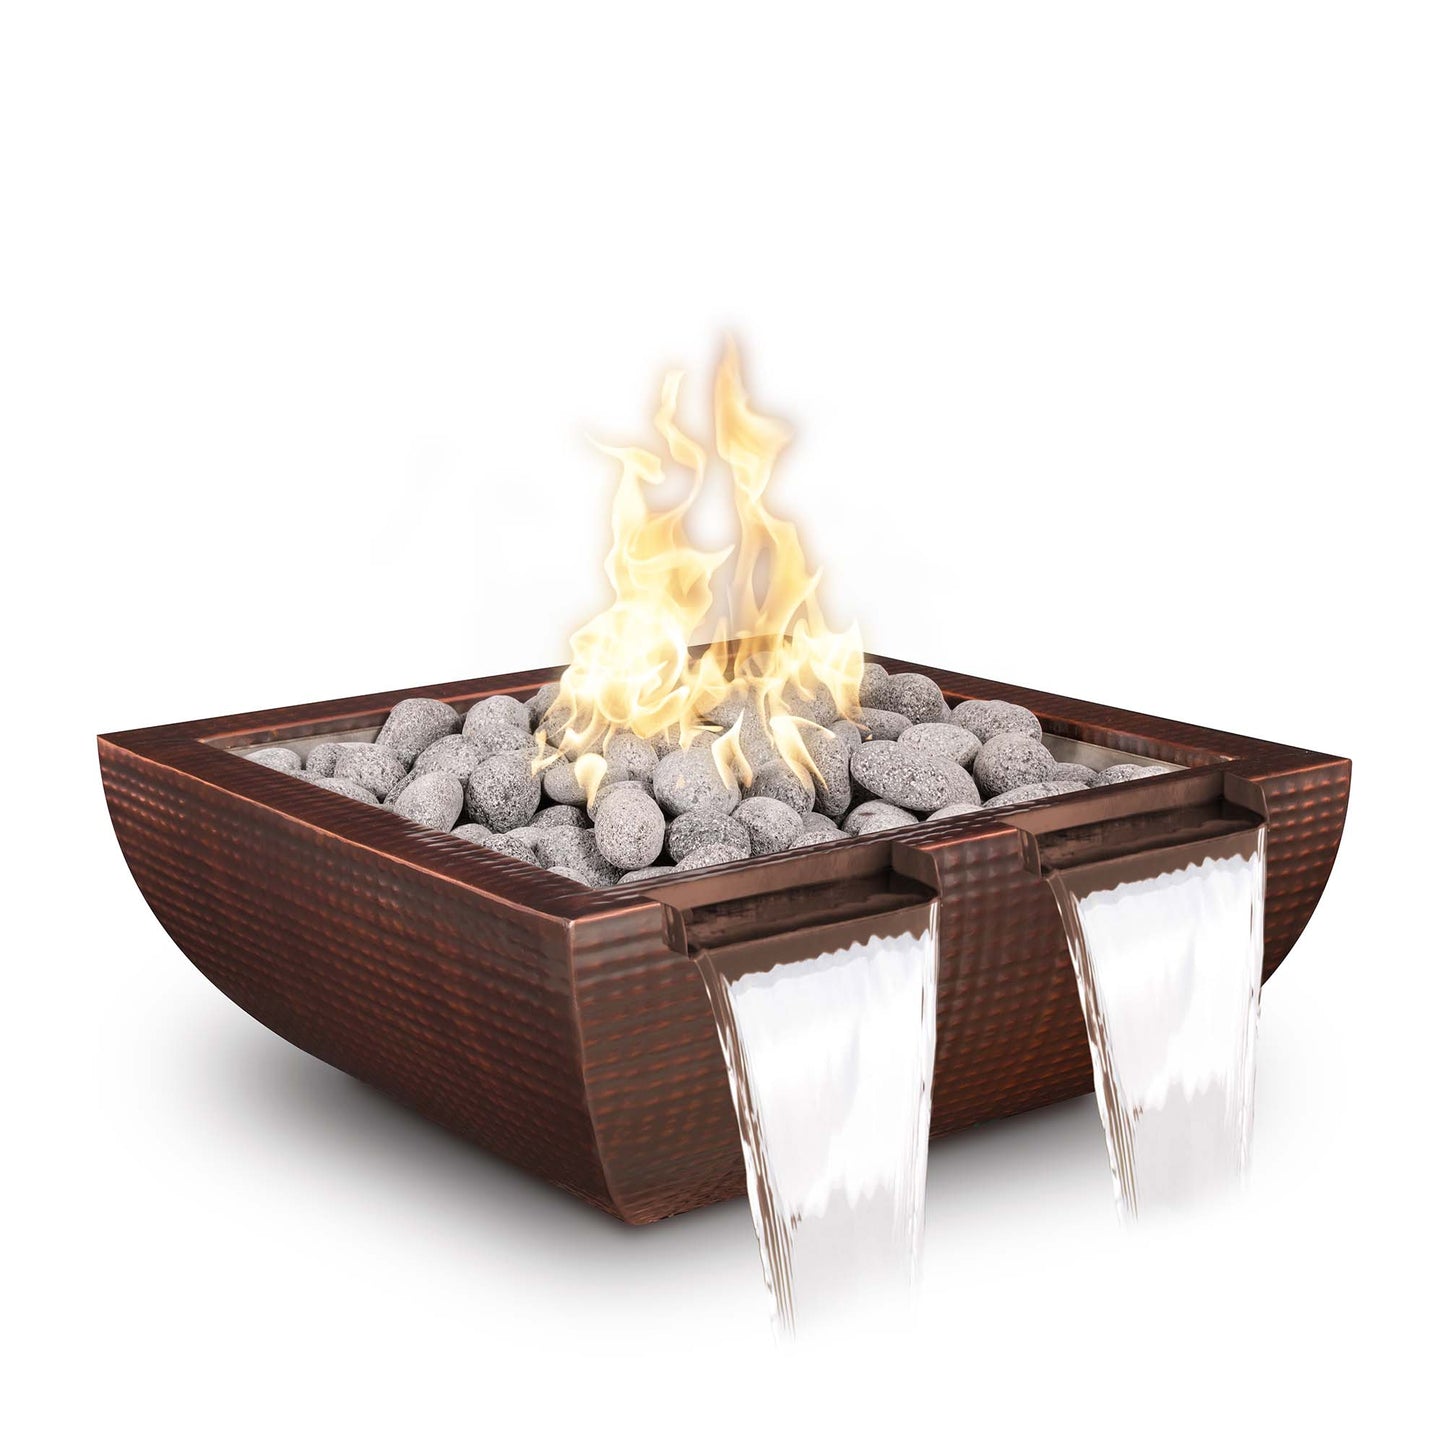 The Outdoor Plus Avalon Twin Spill 24" Gray Powder Coated Metal Natural Gas Fire & Water Bowl with Match Lit with Flame Sense Ignition